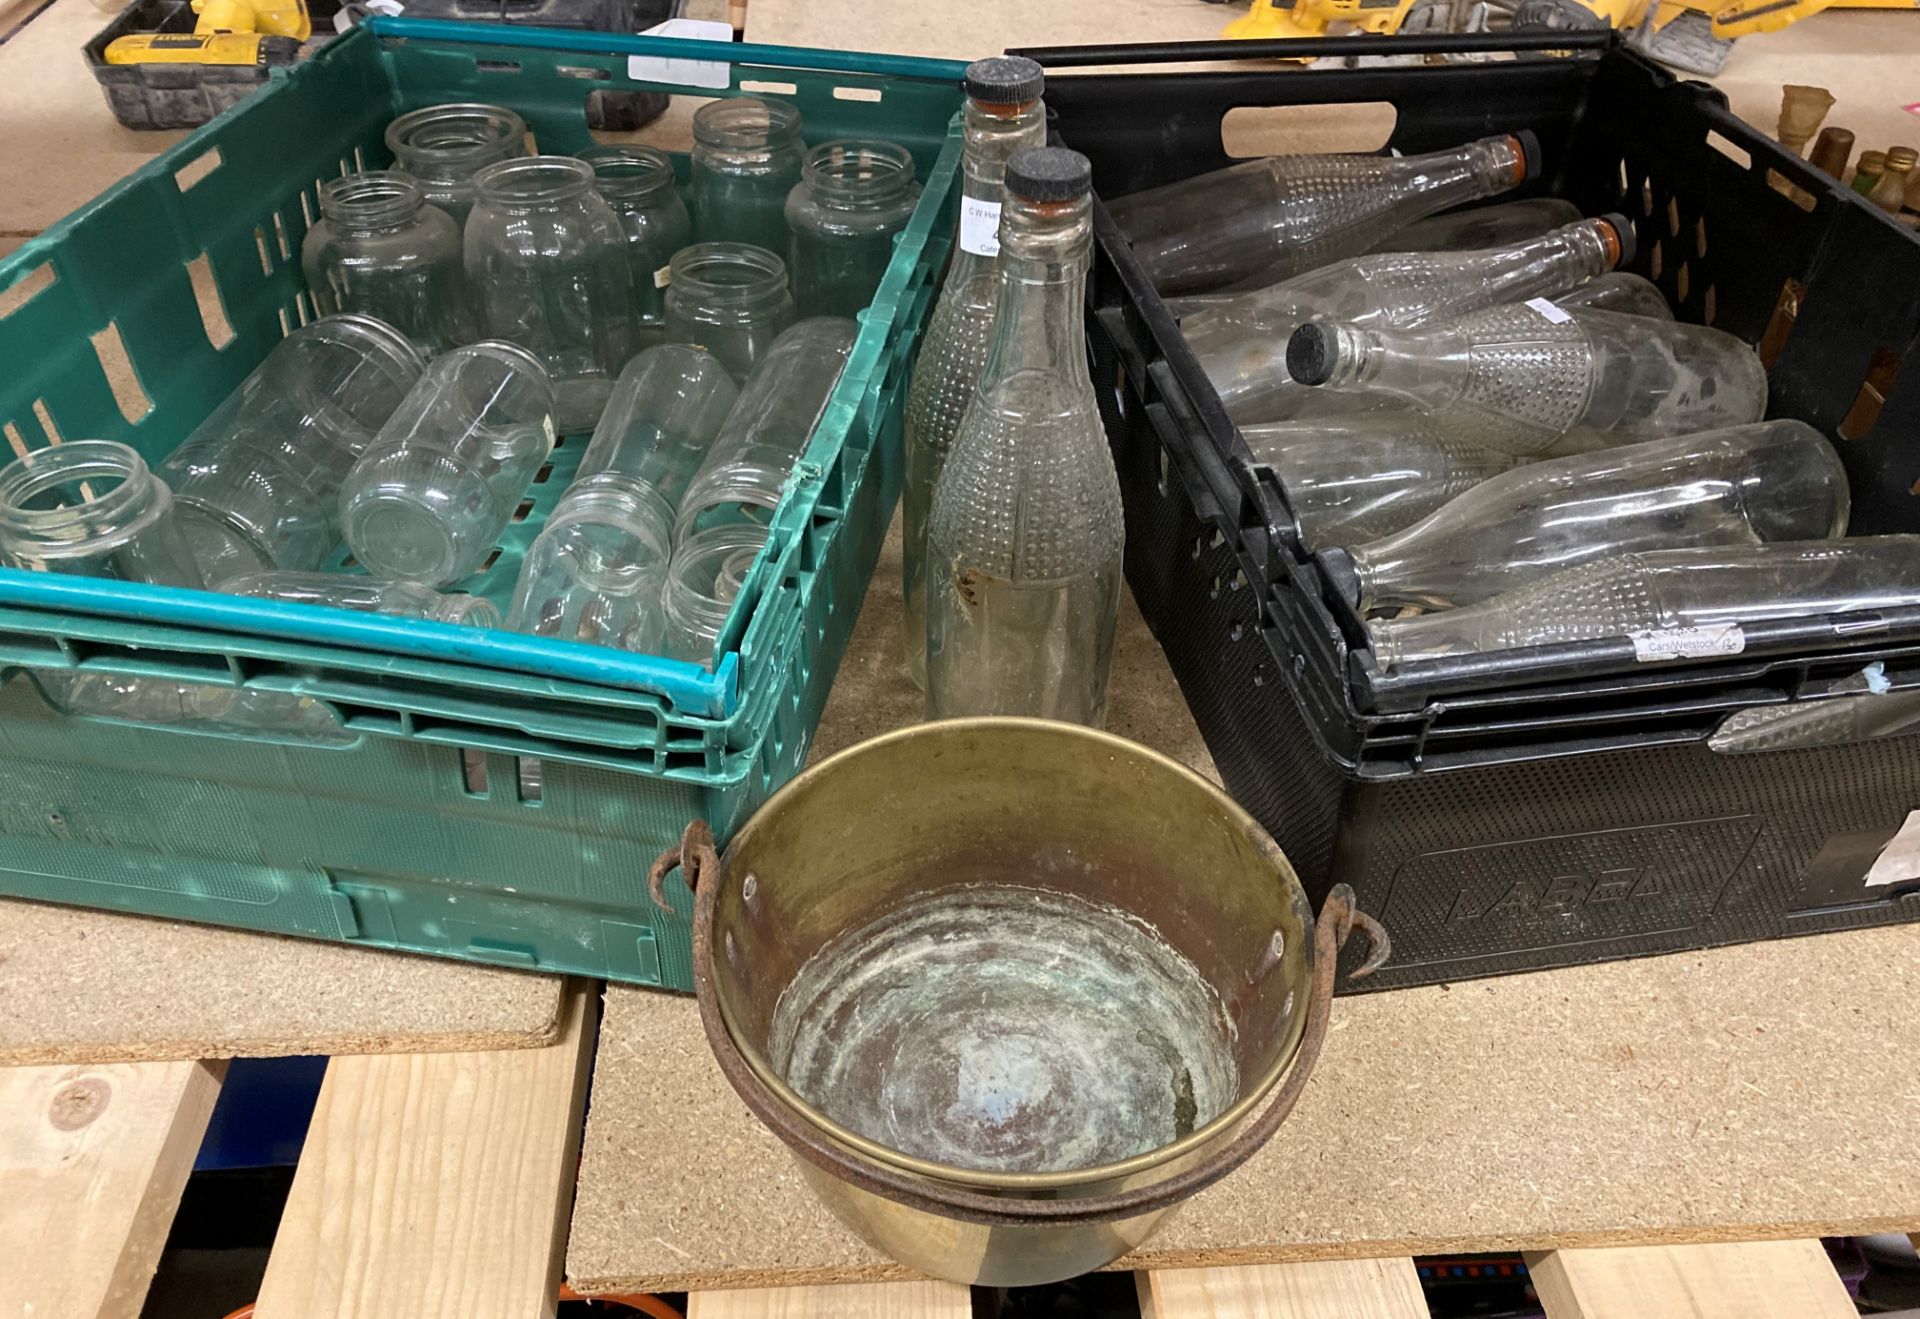 Contents to two trays (trays property of CW Harrison) approximately 14 empty Lucozade bottles,